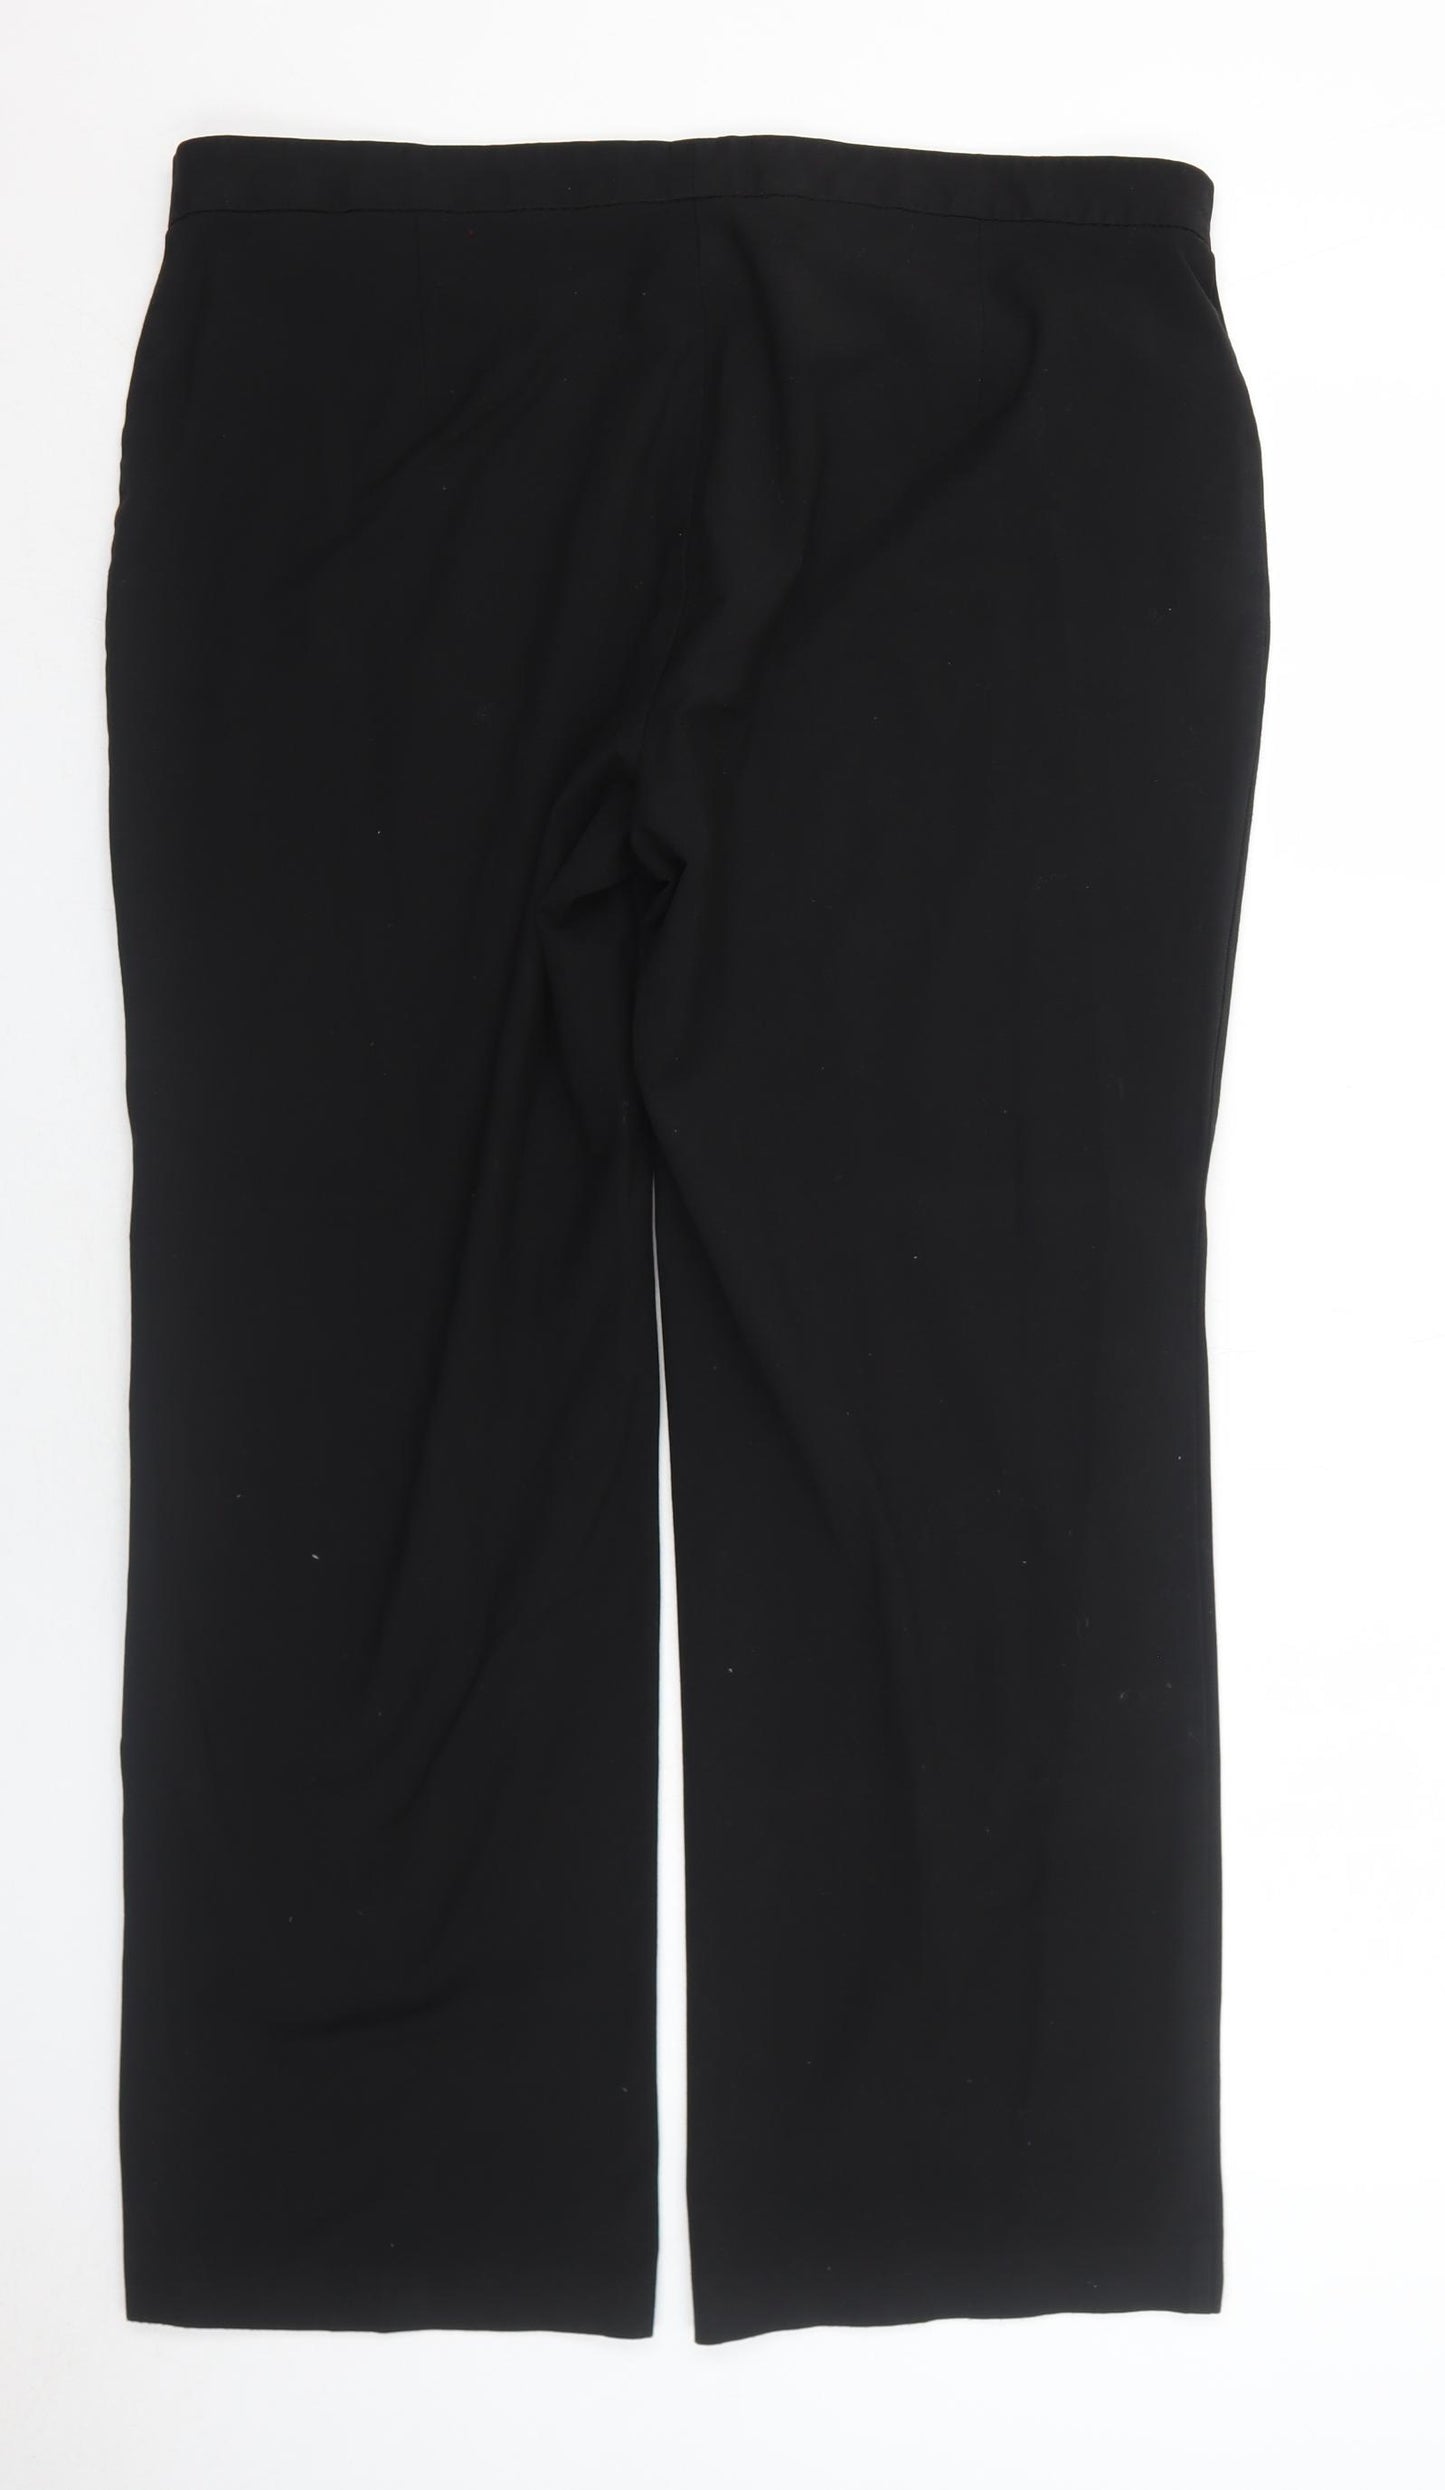 Marks and Spencer Womens Black Polyester Dress Pants Trousers Size 18 Regular Zip